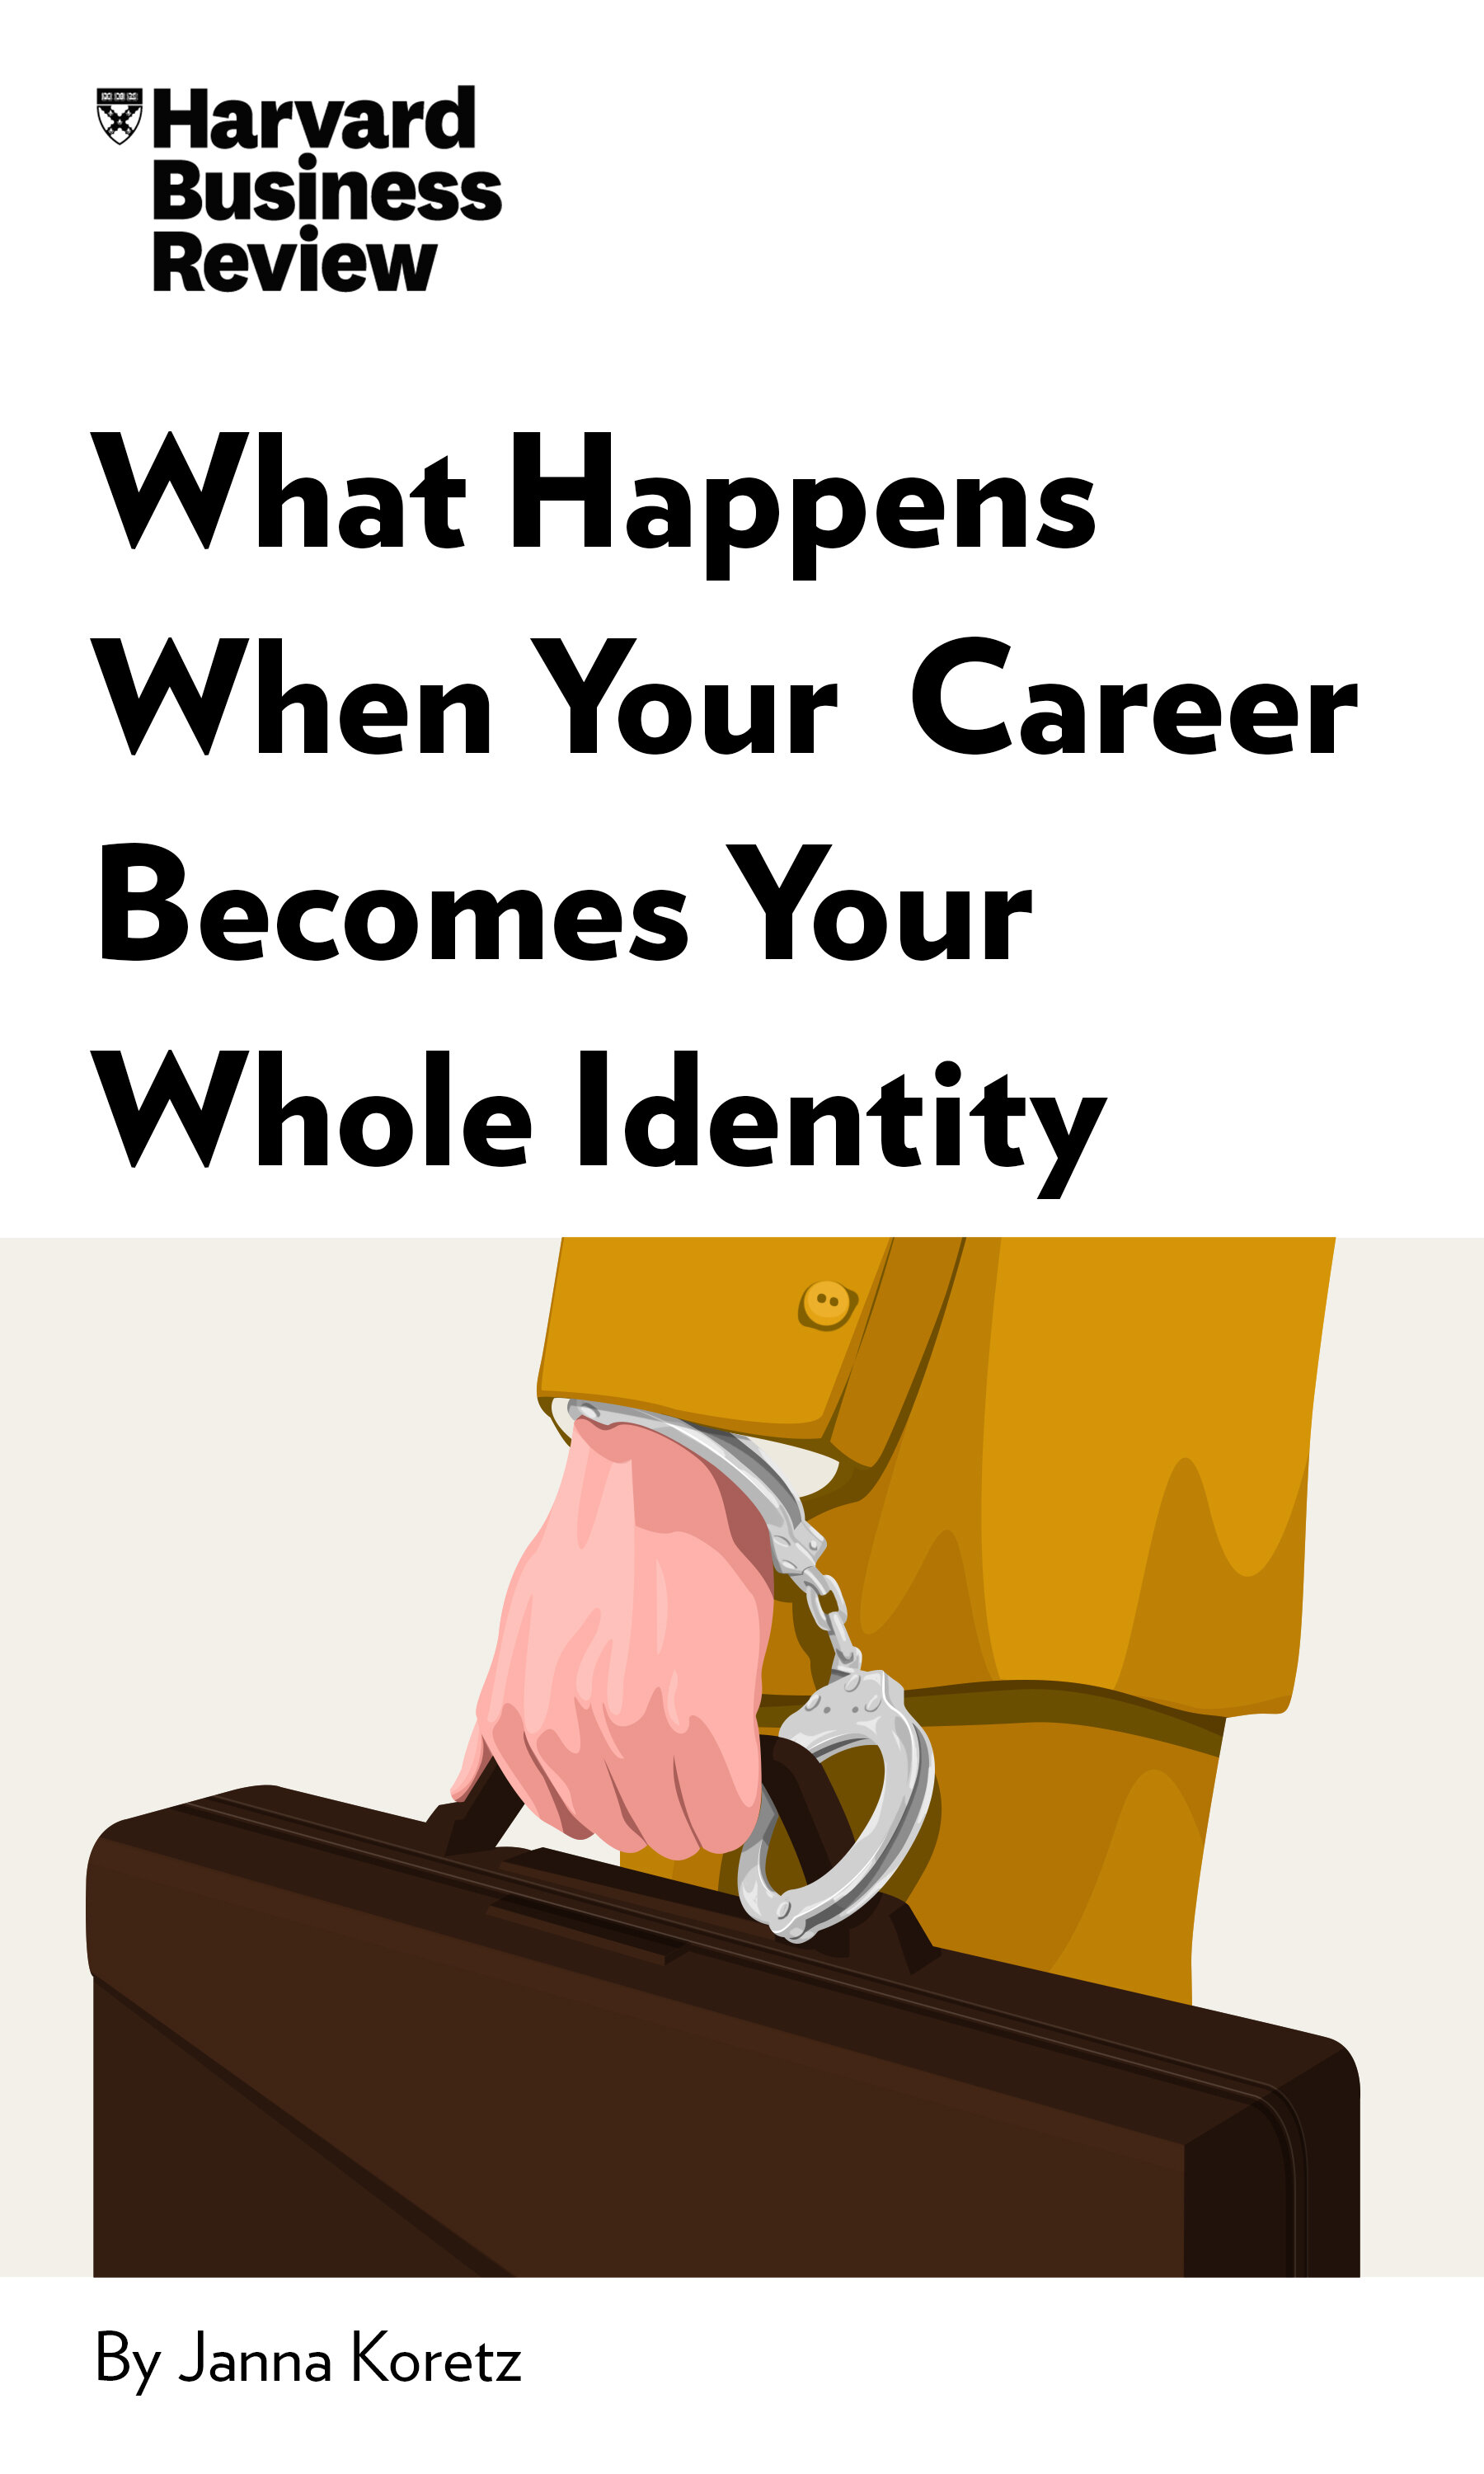 What-Happens-When-Your-Career-Becomes-Your-Whole-Identity-eBook.jpg